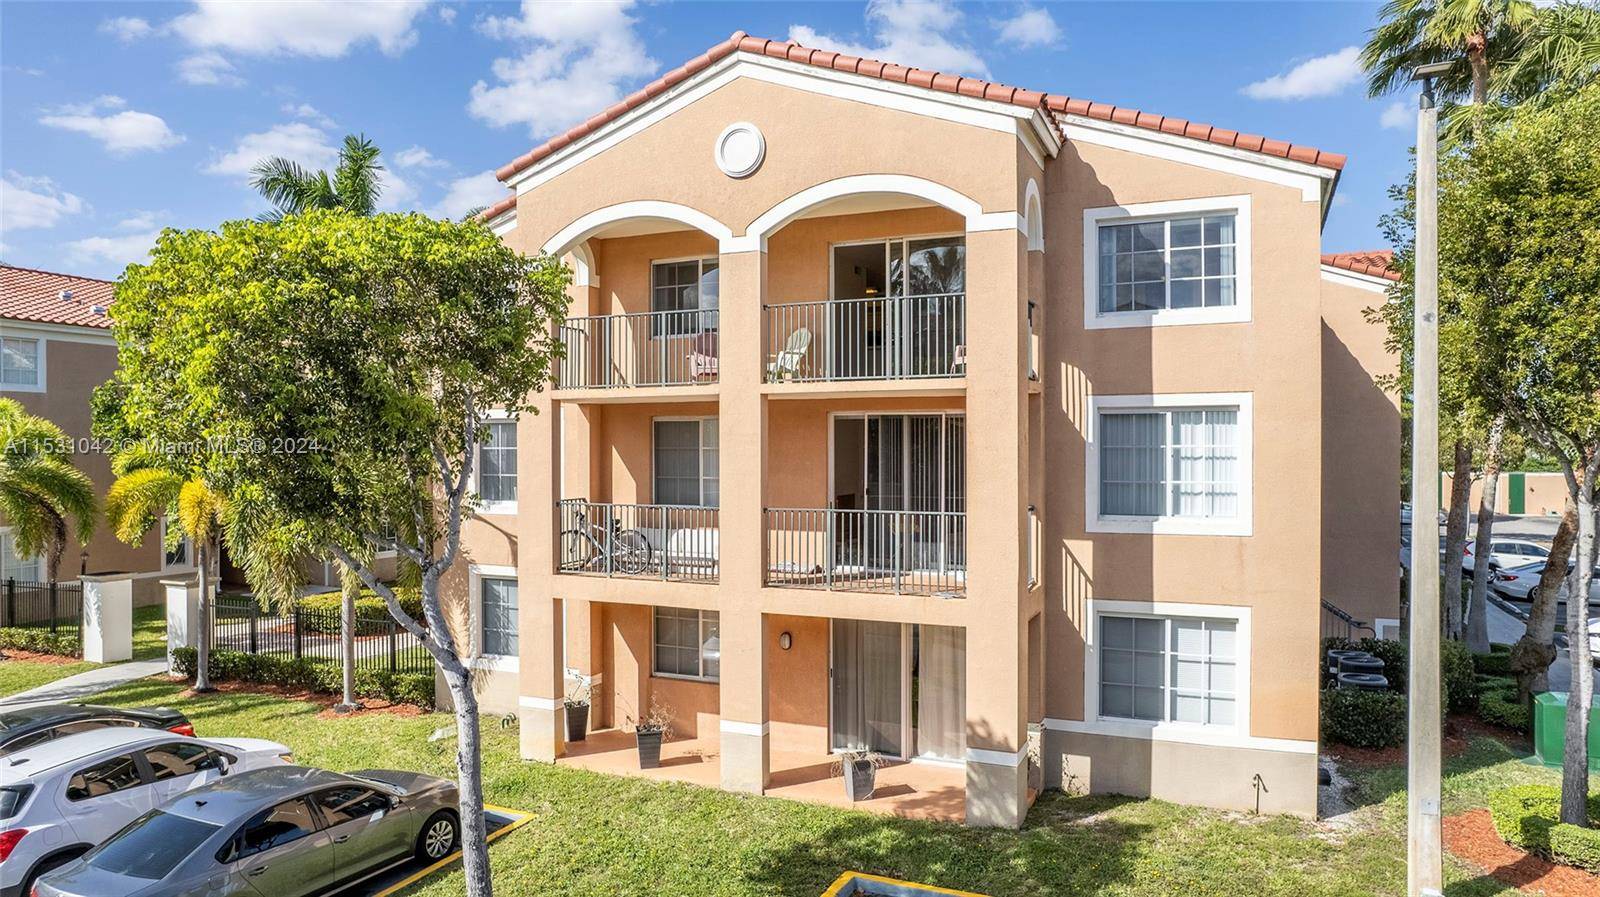 Move in ready 3 2 corner unit in a Mediterranean style gated community located between Coral Gables and South Miami, close to US1 and the Palmetto Expressway, minutes from restaurants ...